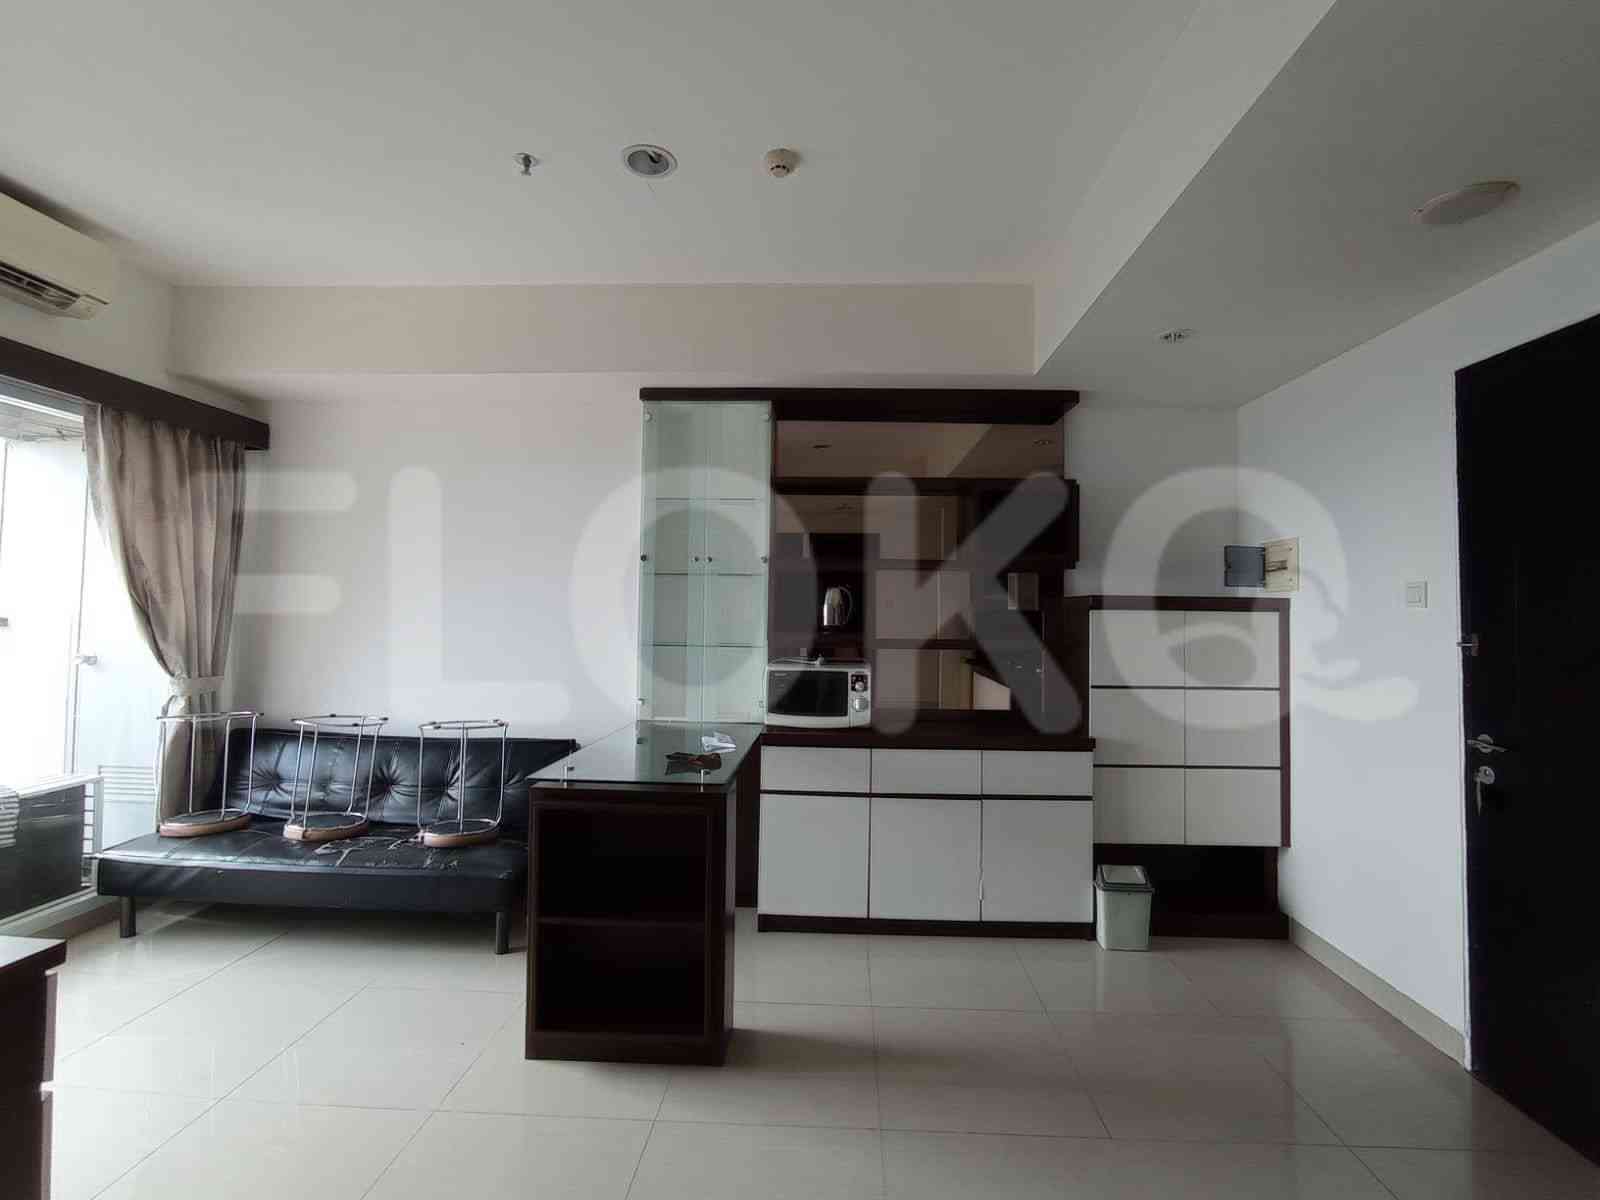 2 Bedroom on 16th Floor for Rent in Skyline Paramount Serpong - fga58c 8